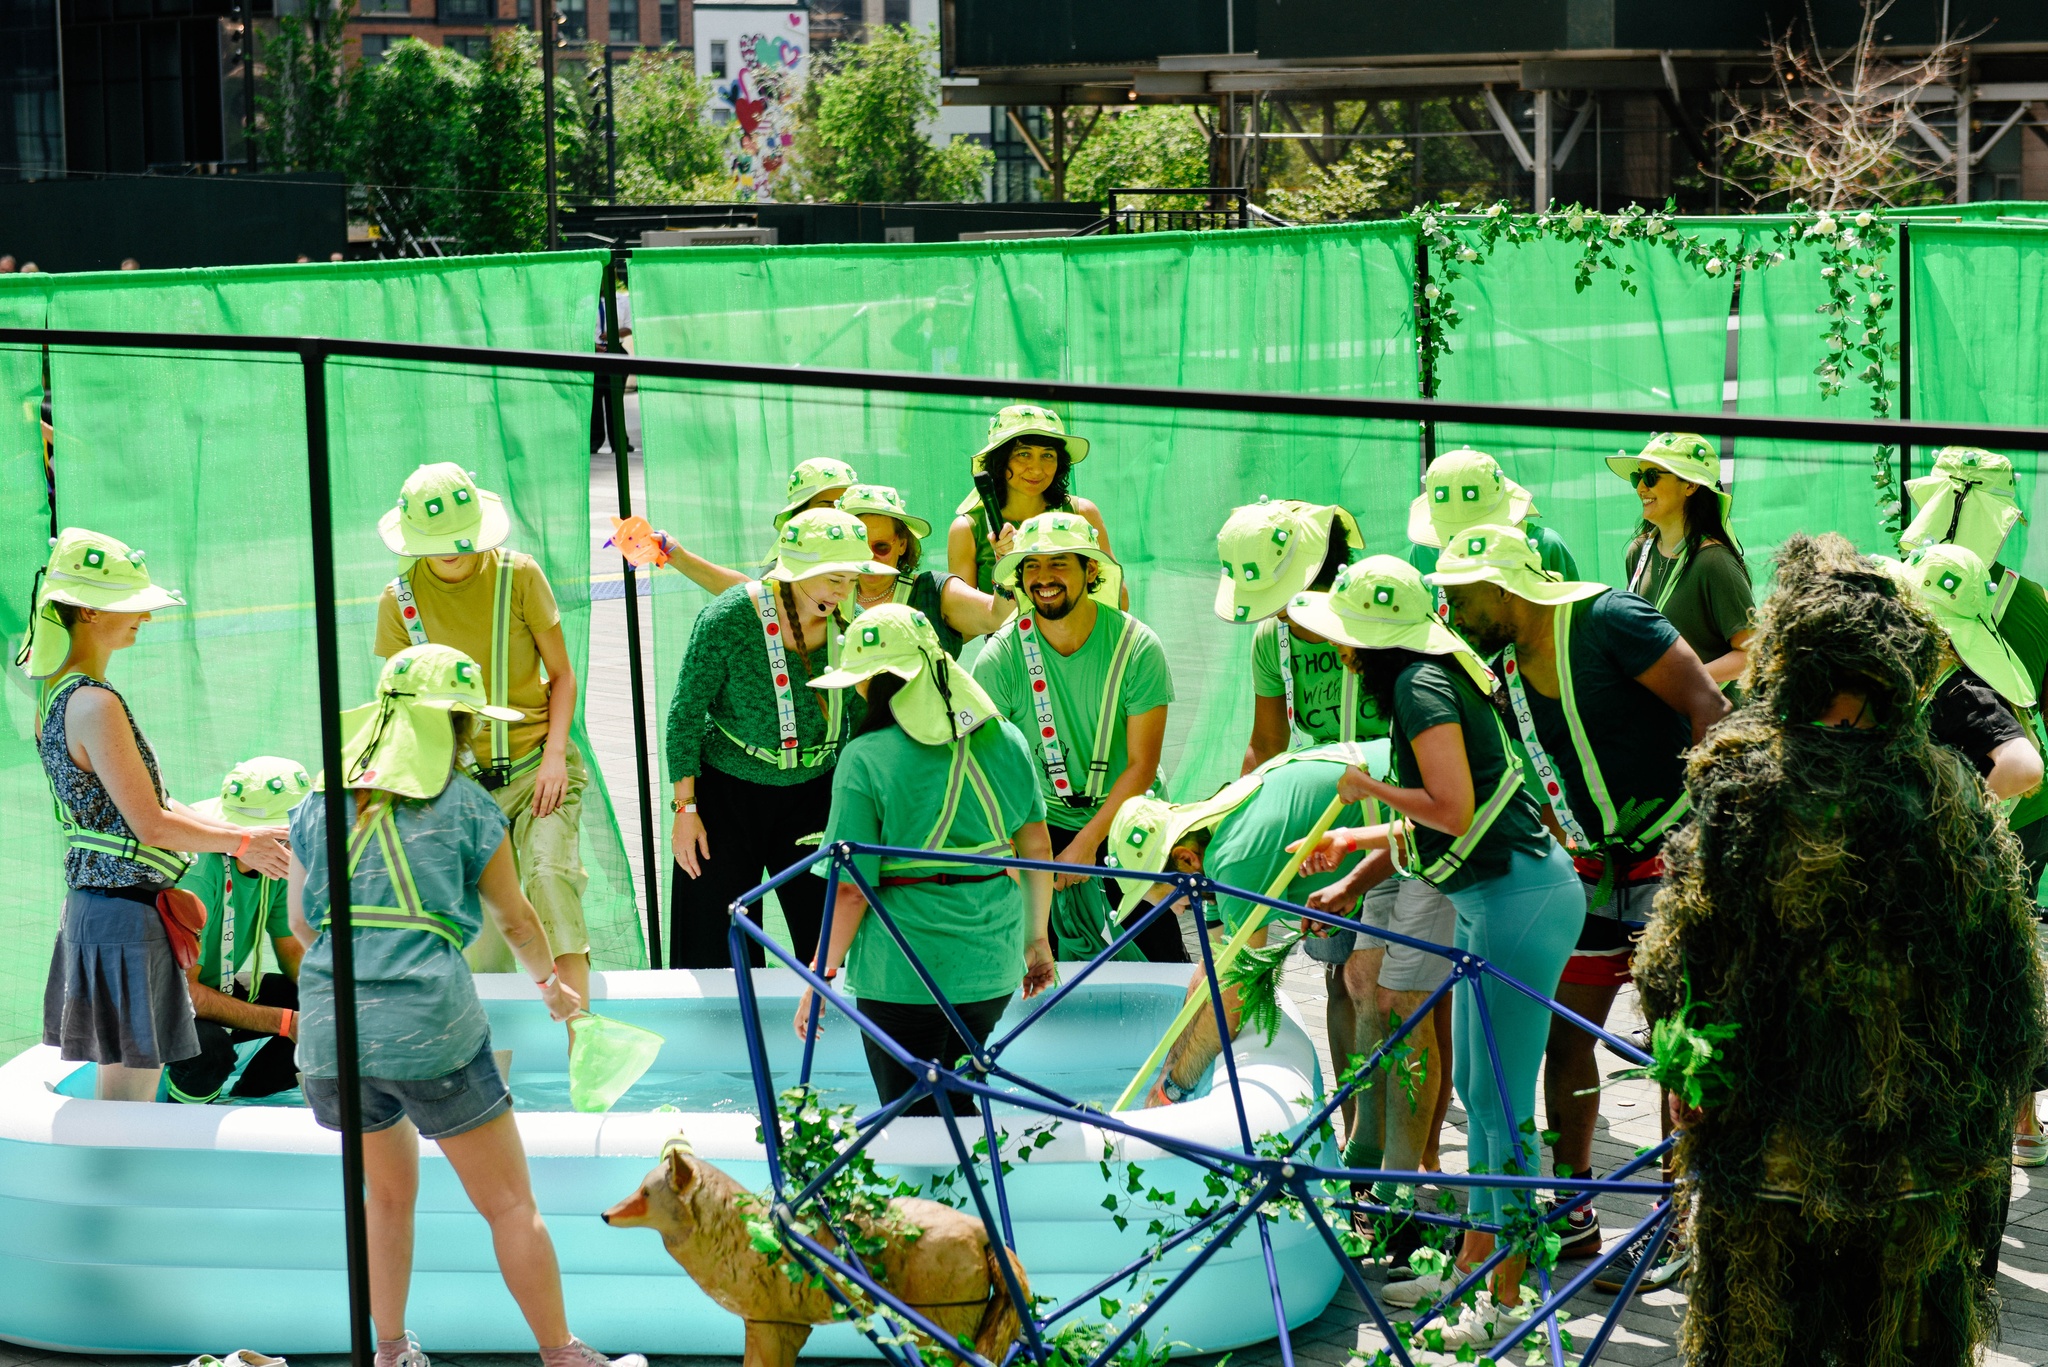 A group of participants in green hats around a kiddie pool.